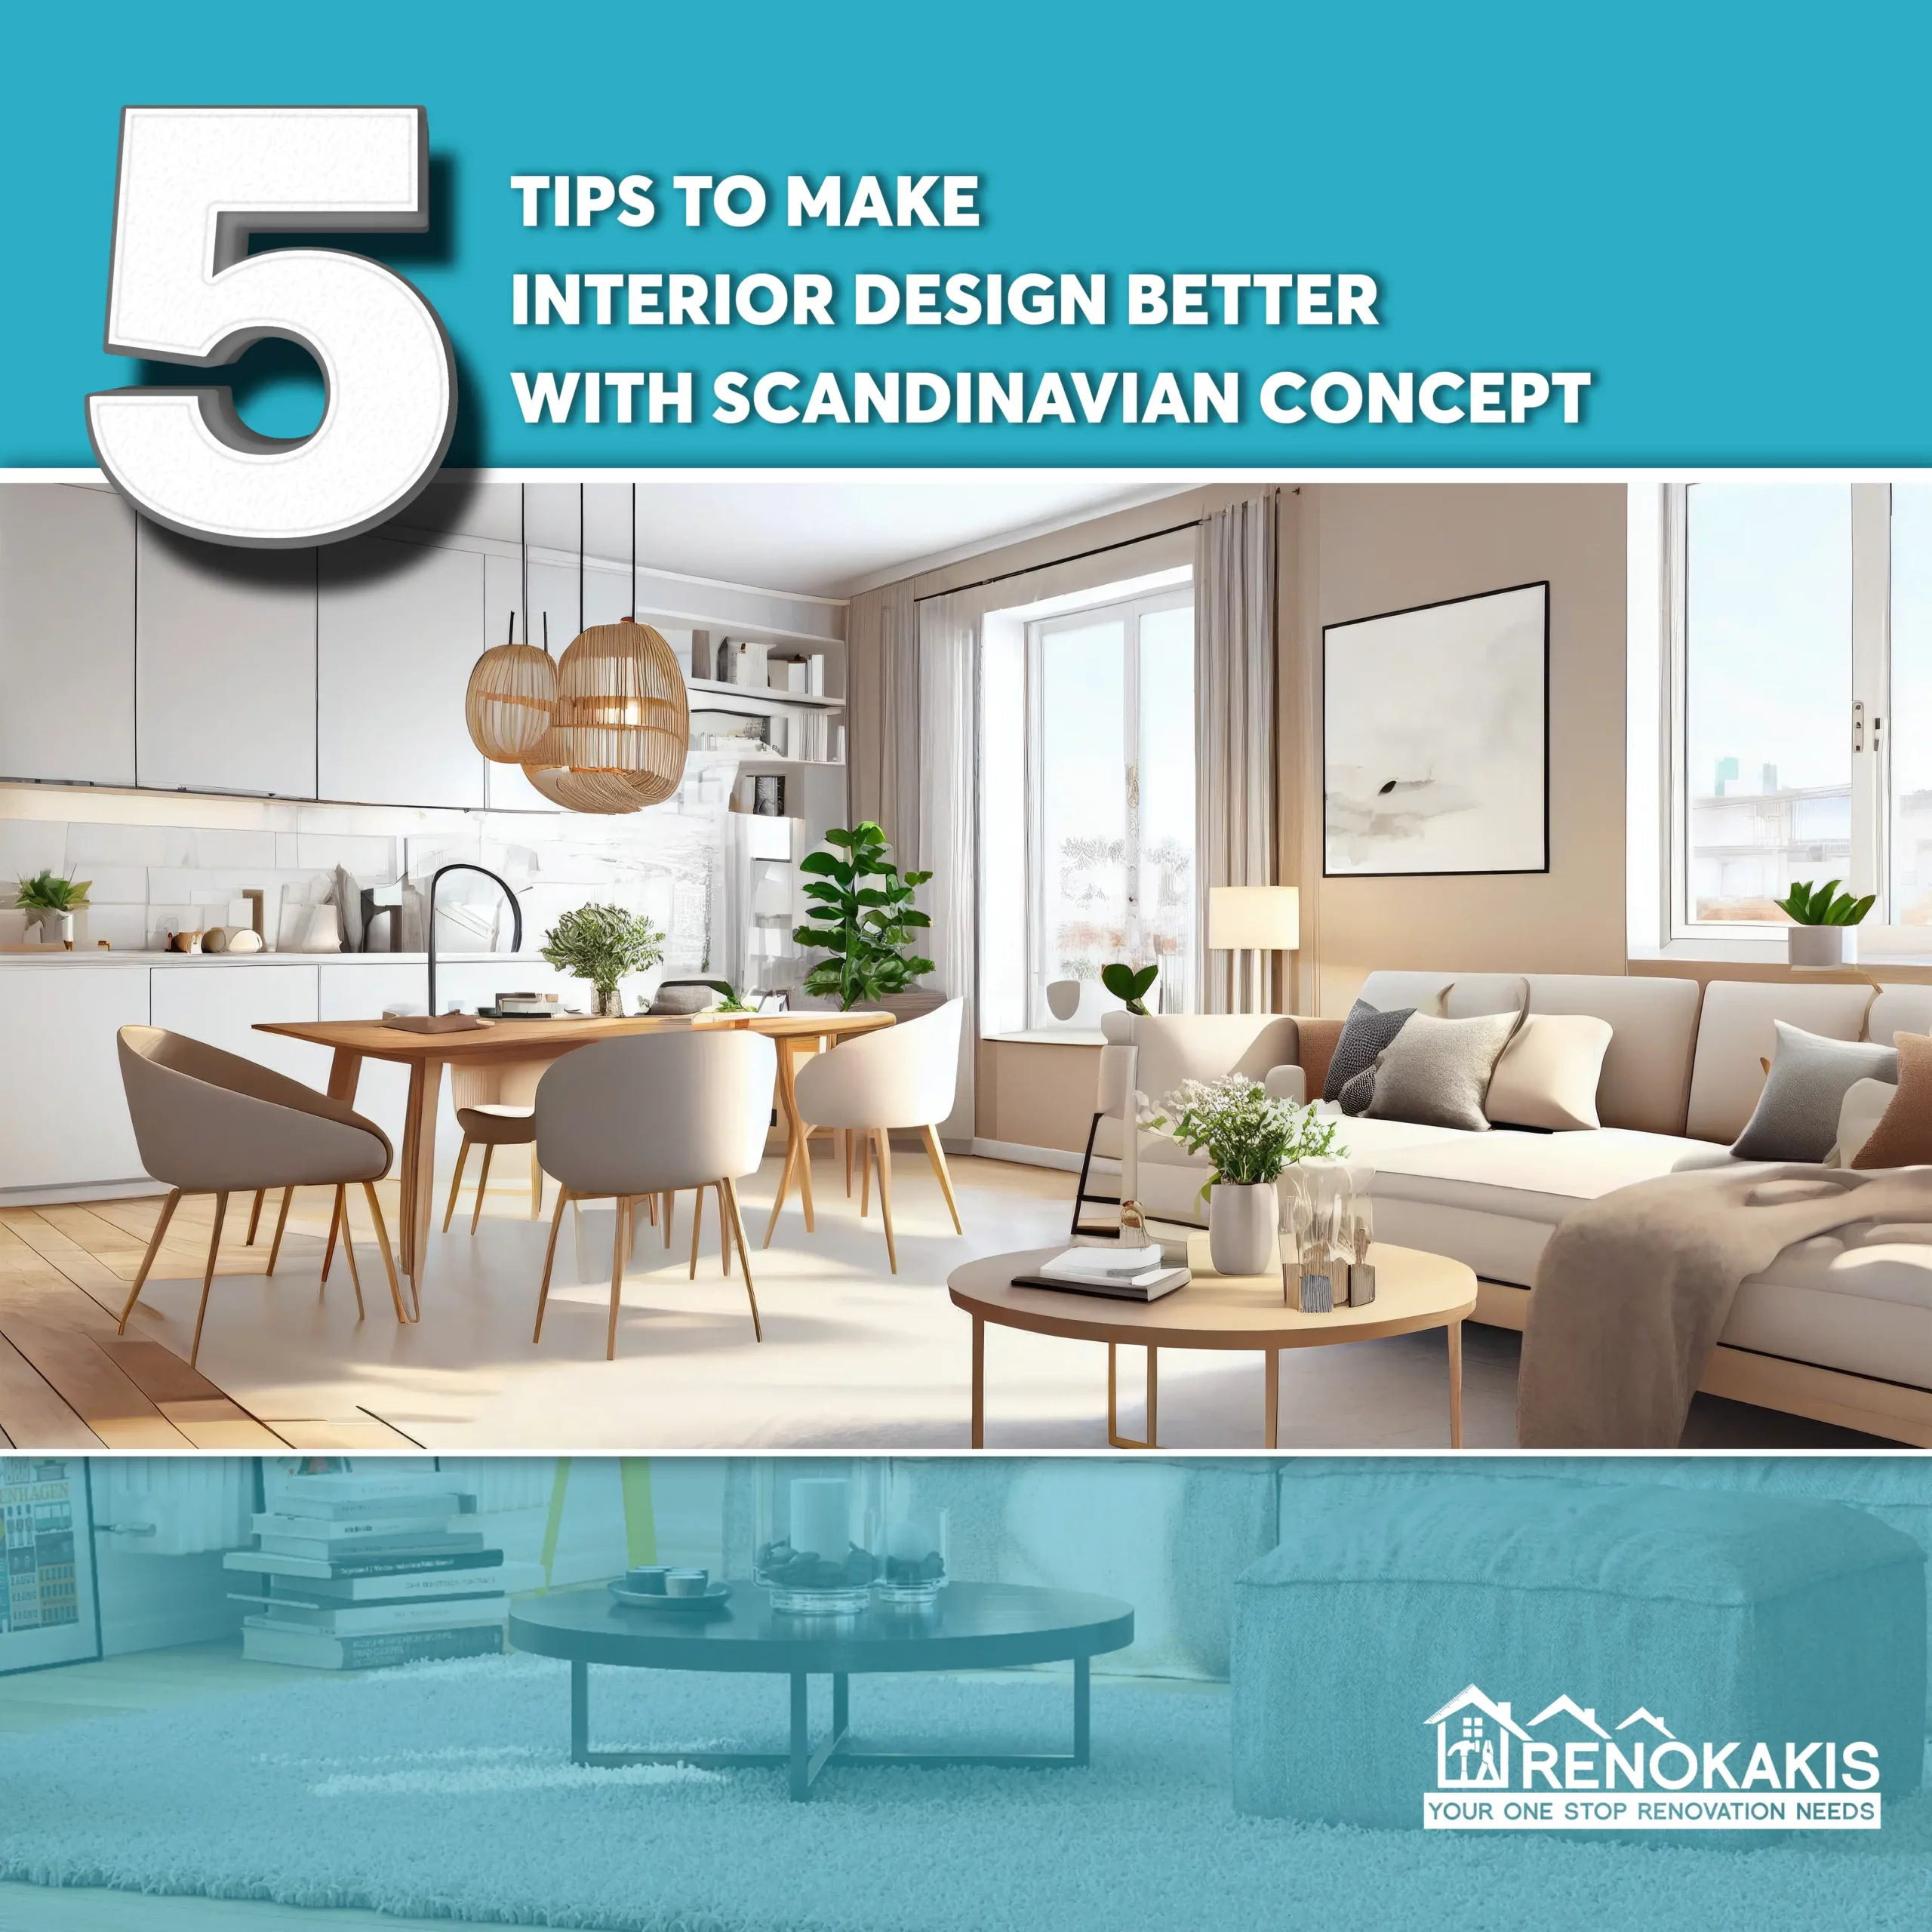 5 Tips To Make Interior Design Better With Scandinavian Concept